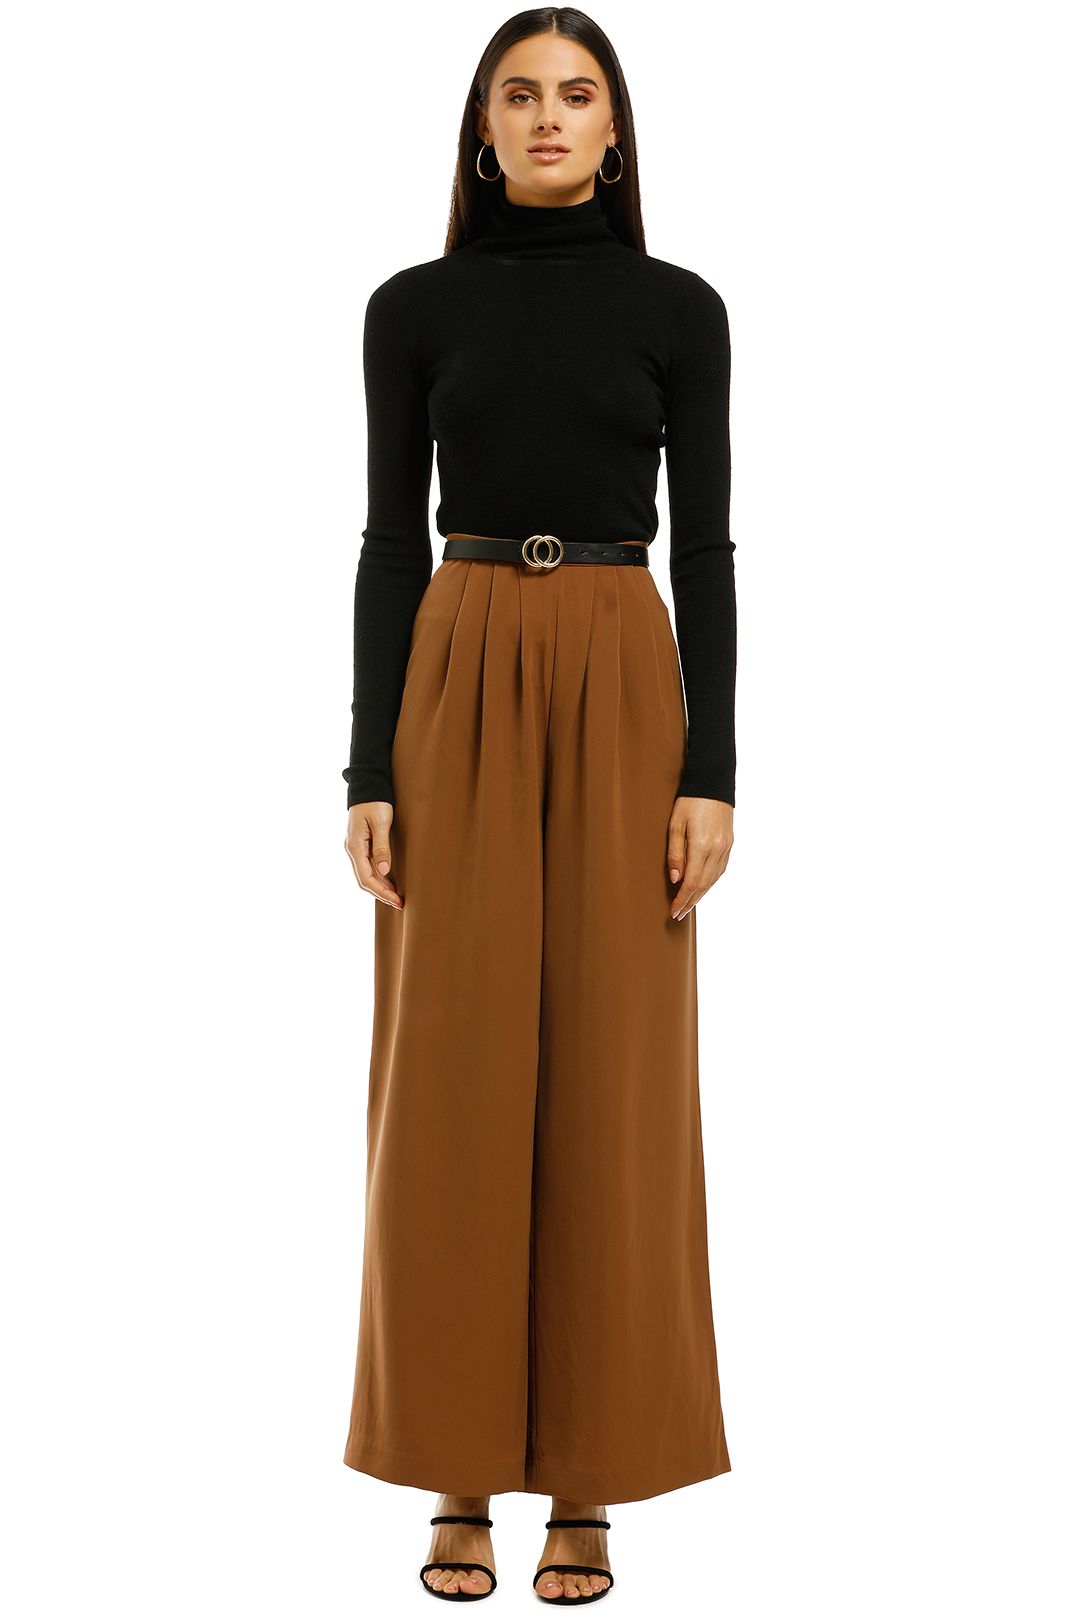 Friend of Audrey - Pleated Wide Pant - Tan - Front